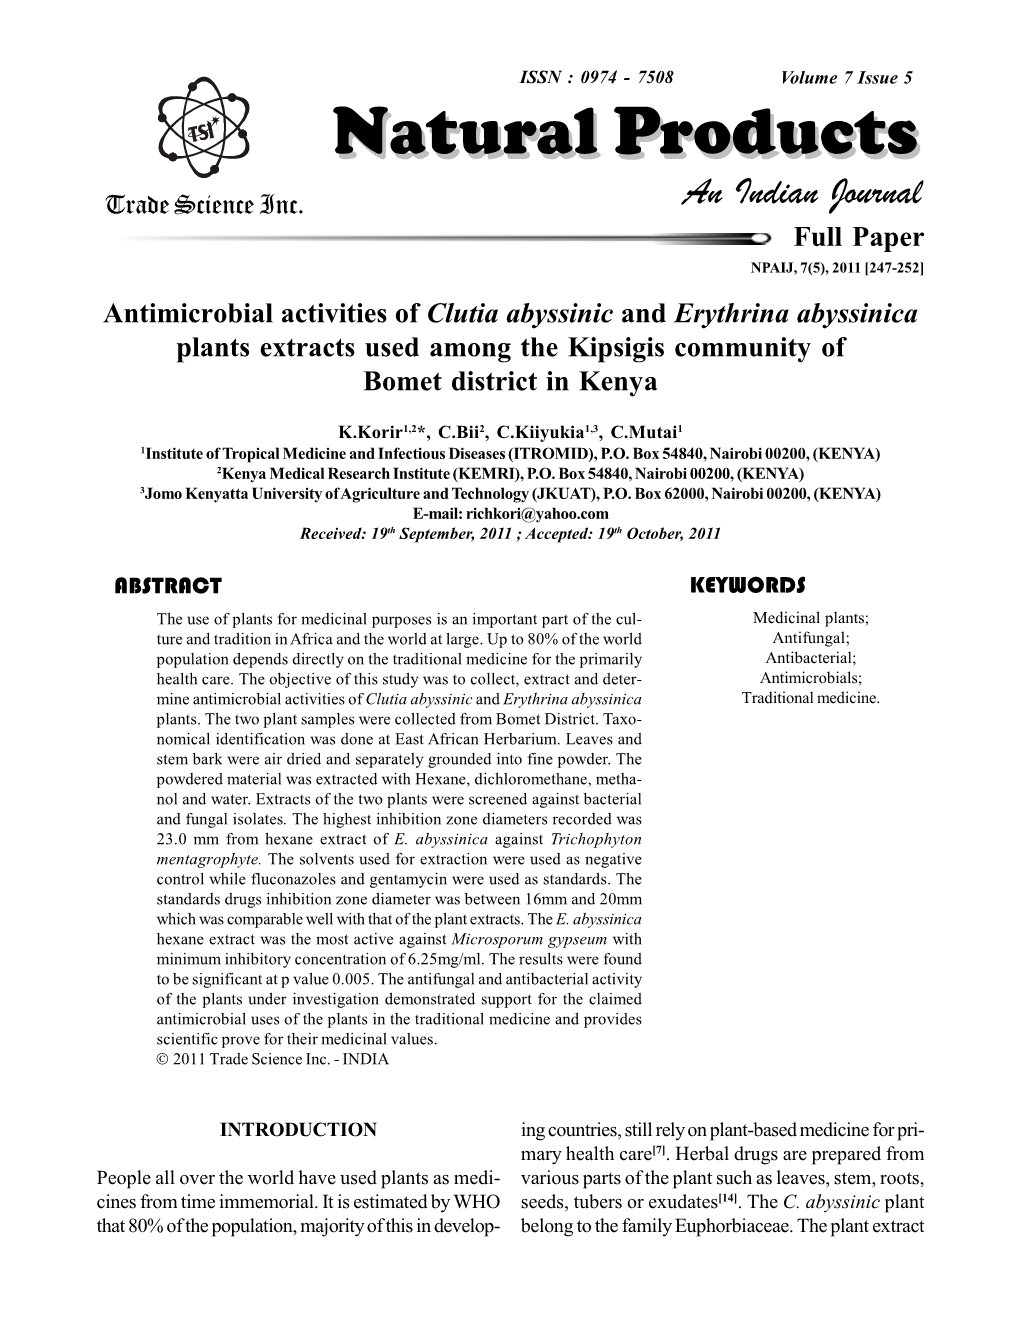 Antimicrobial Activities of Clutia Abyssinic and Erythrina Abyssinica Plants Extracts Used Among the Kipsigis Community of Bomet District in Kenya